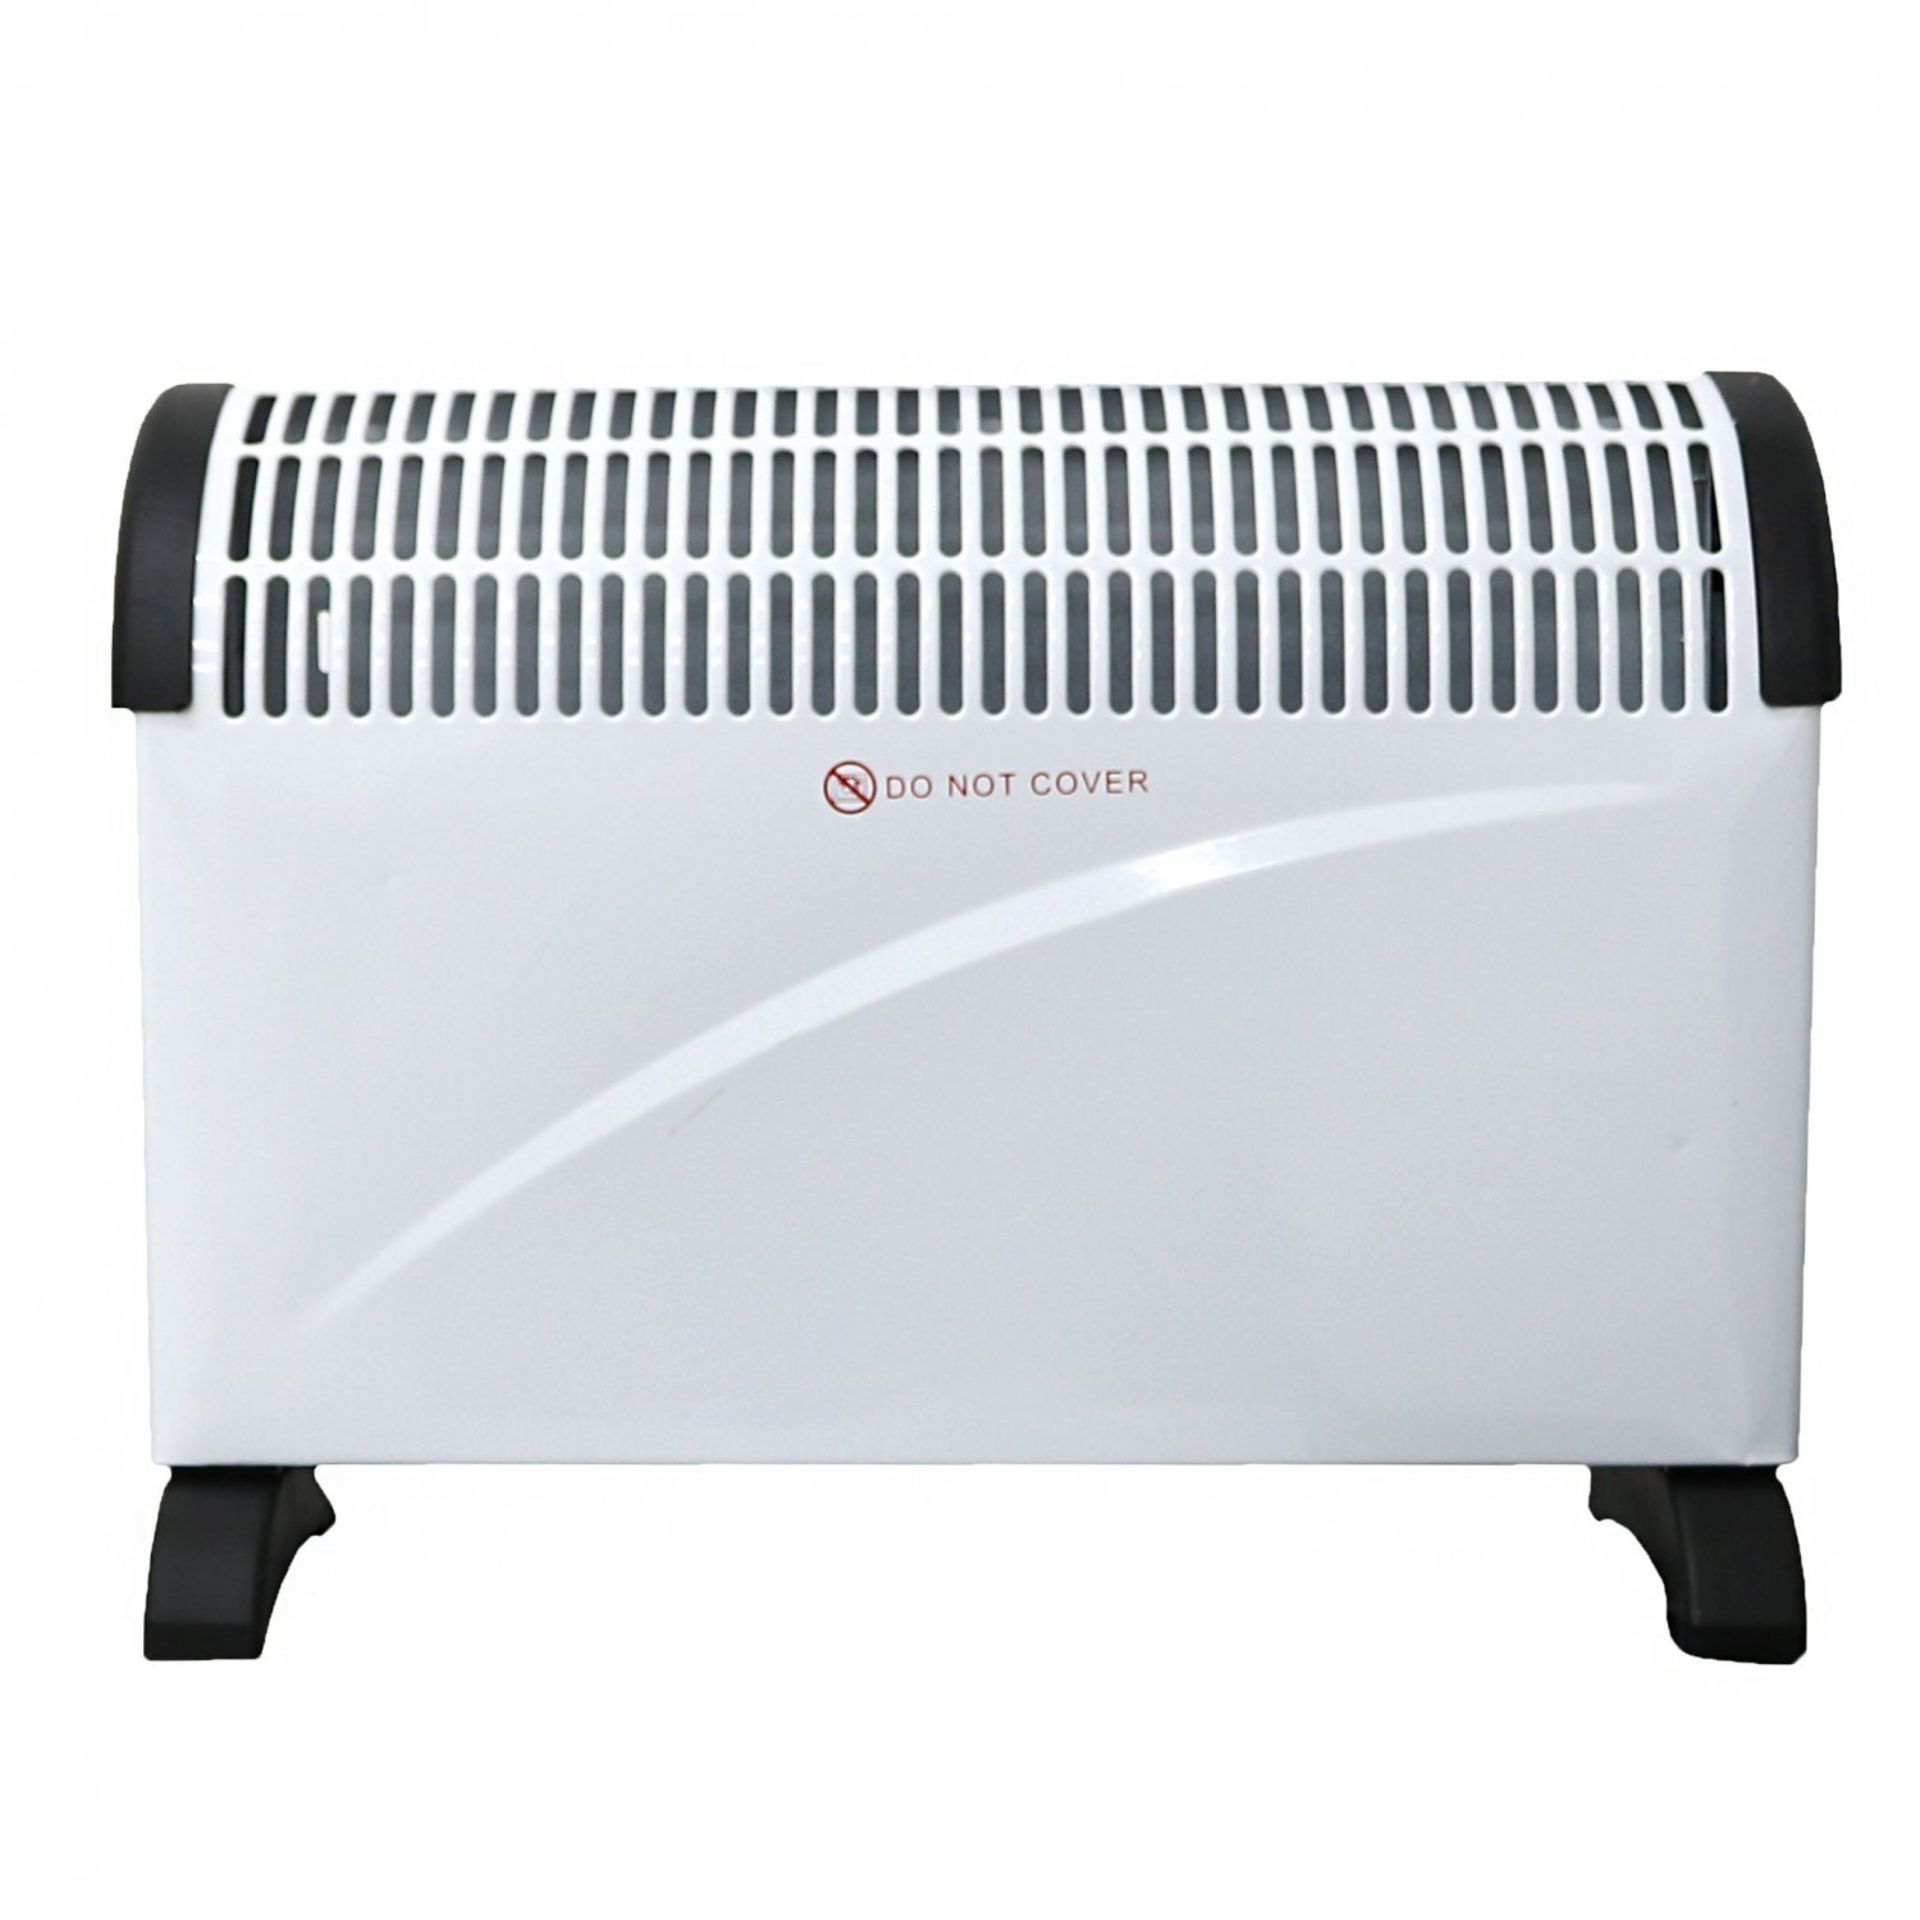 (SK79) 2KW Free Standing Convector Heater Stay warm this year with the 2KW convector ... - Image 2 of 2